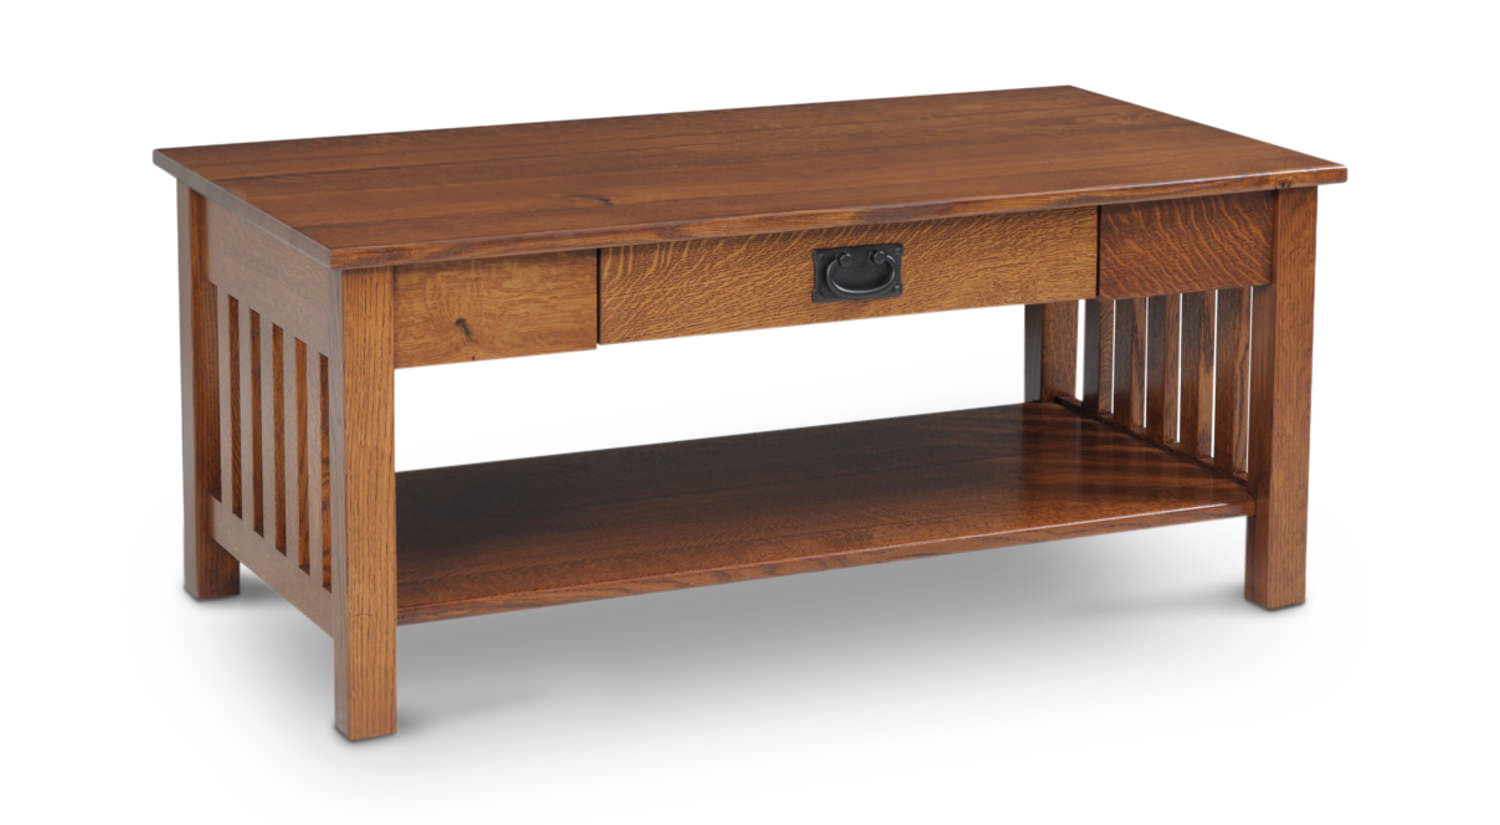 Oxford Mission Coffee Table Hom Furniture intended for sizing 1500 X 825